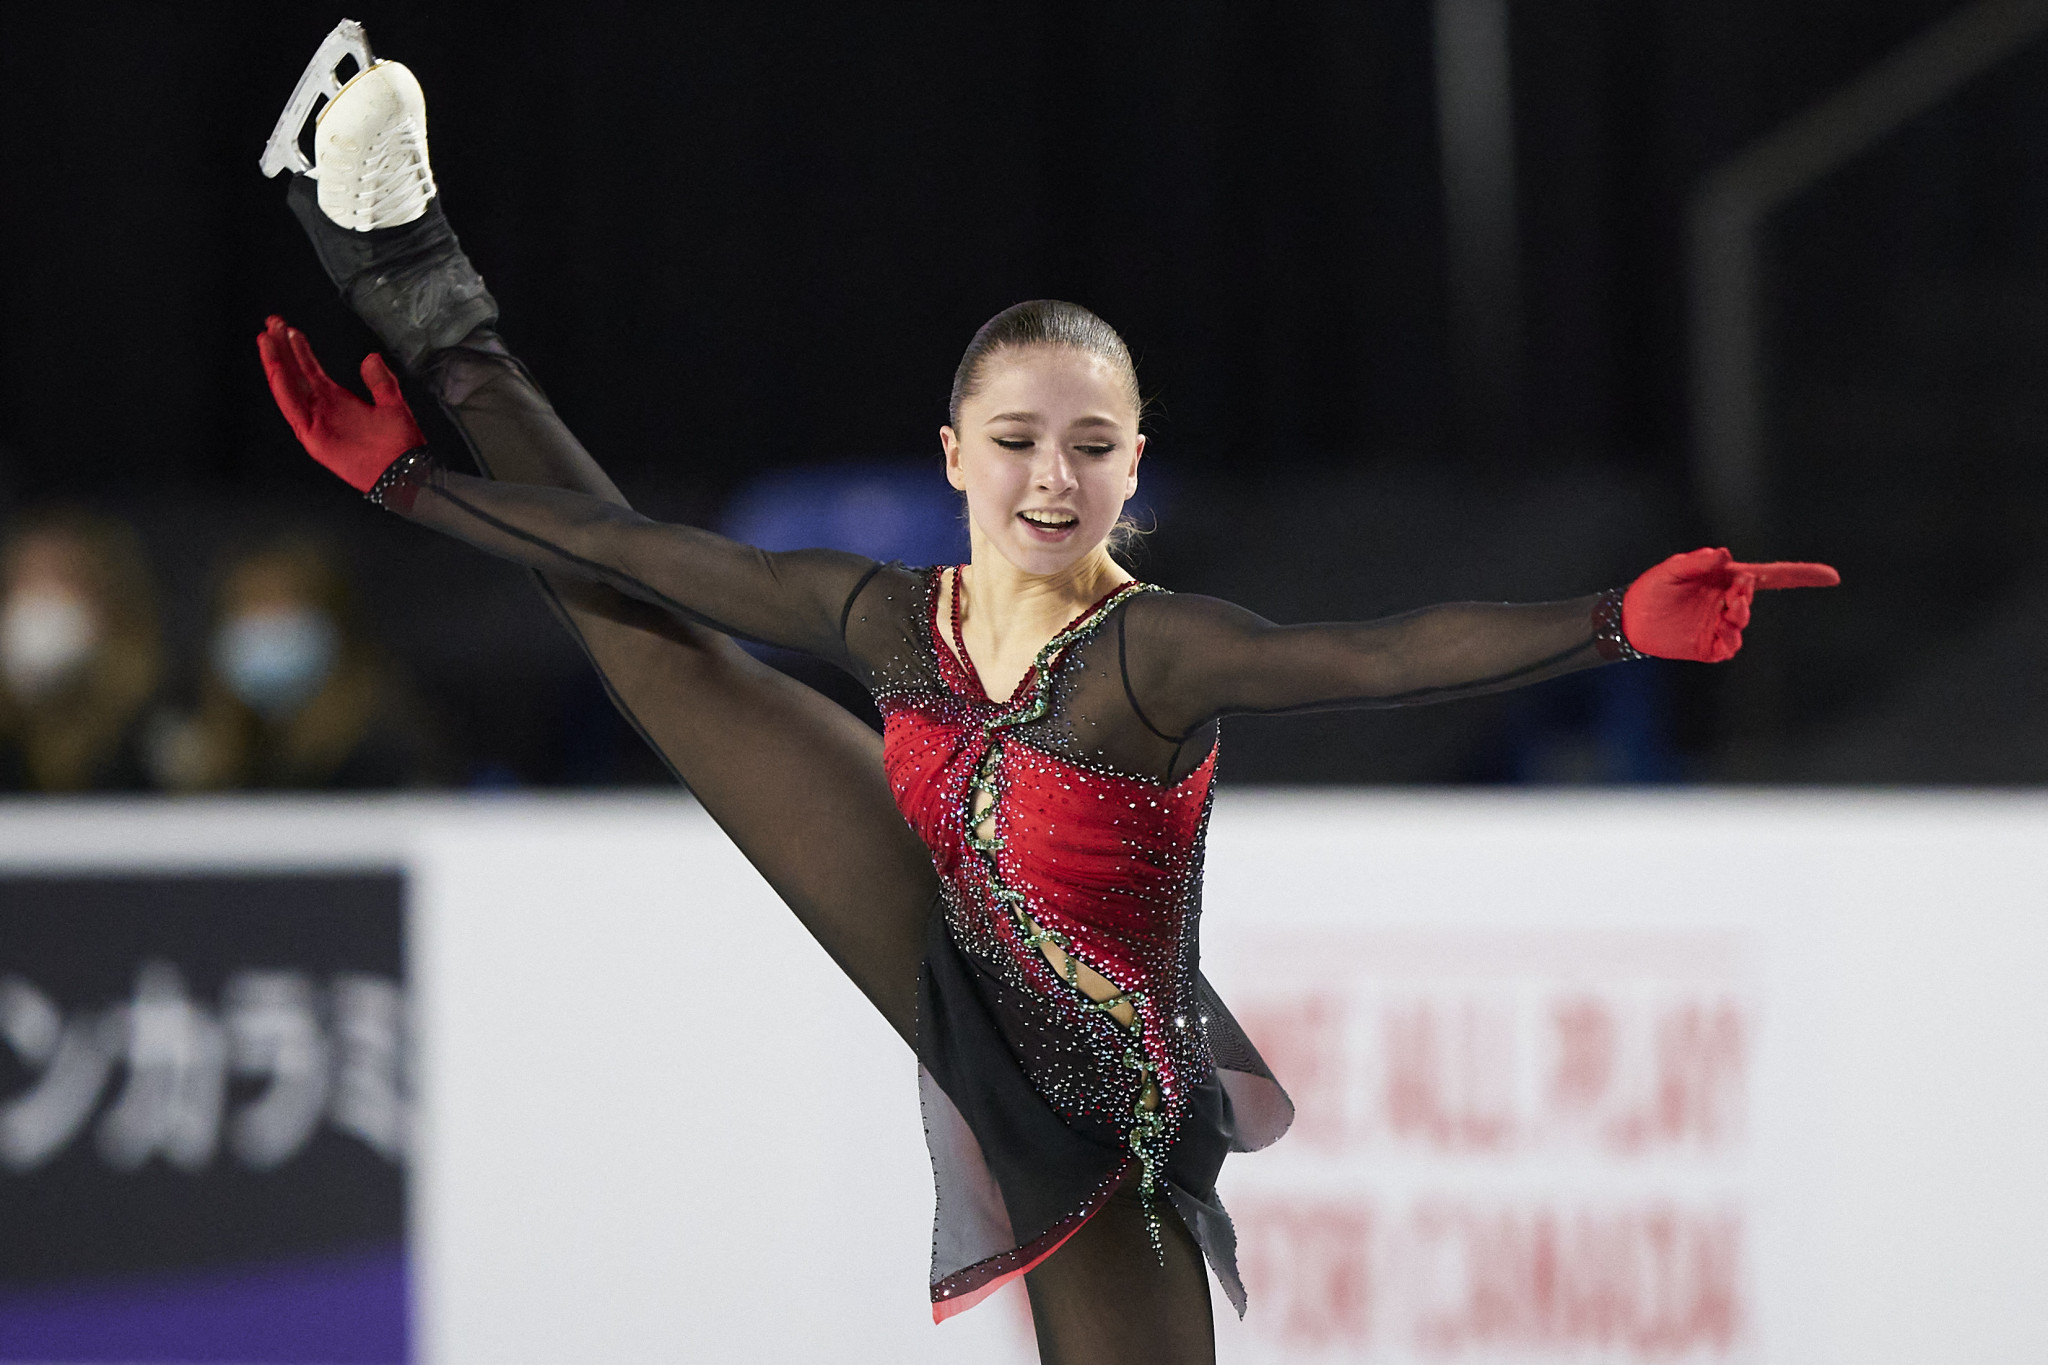 Rostelecom Cup to confirm qualifiers for Grand Prix of Figure Skating Final